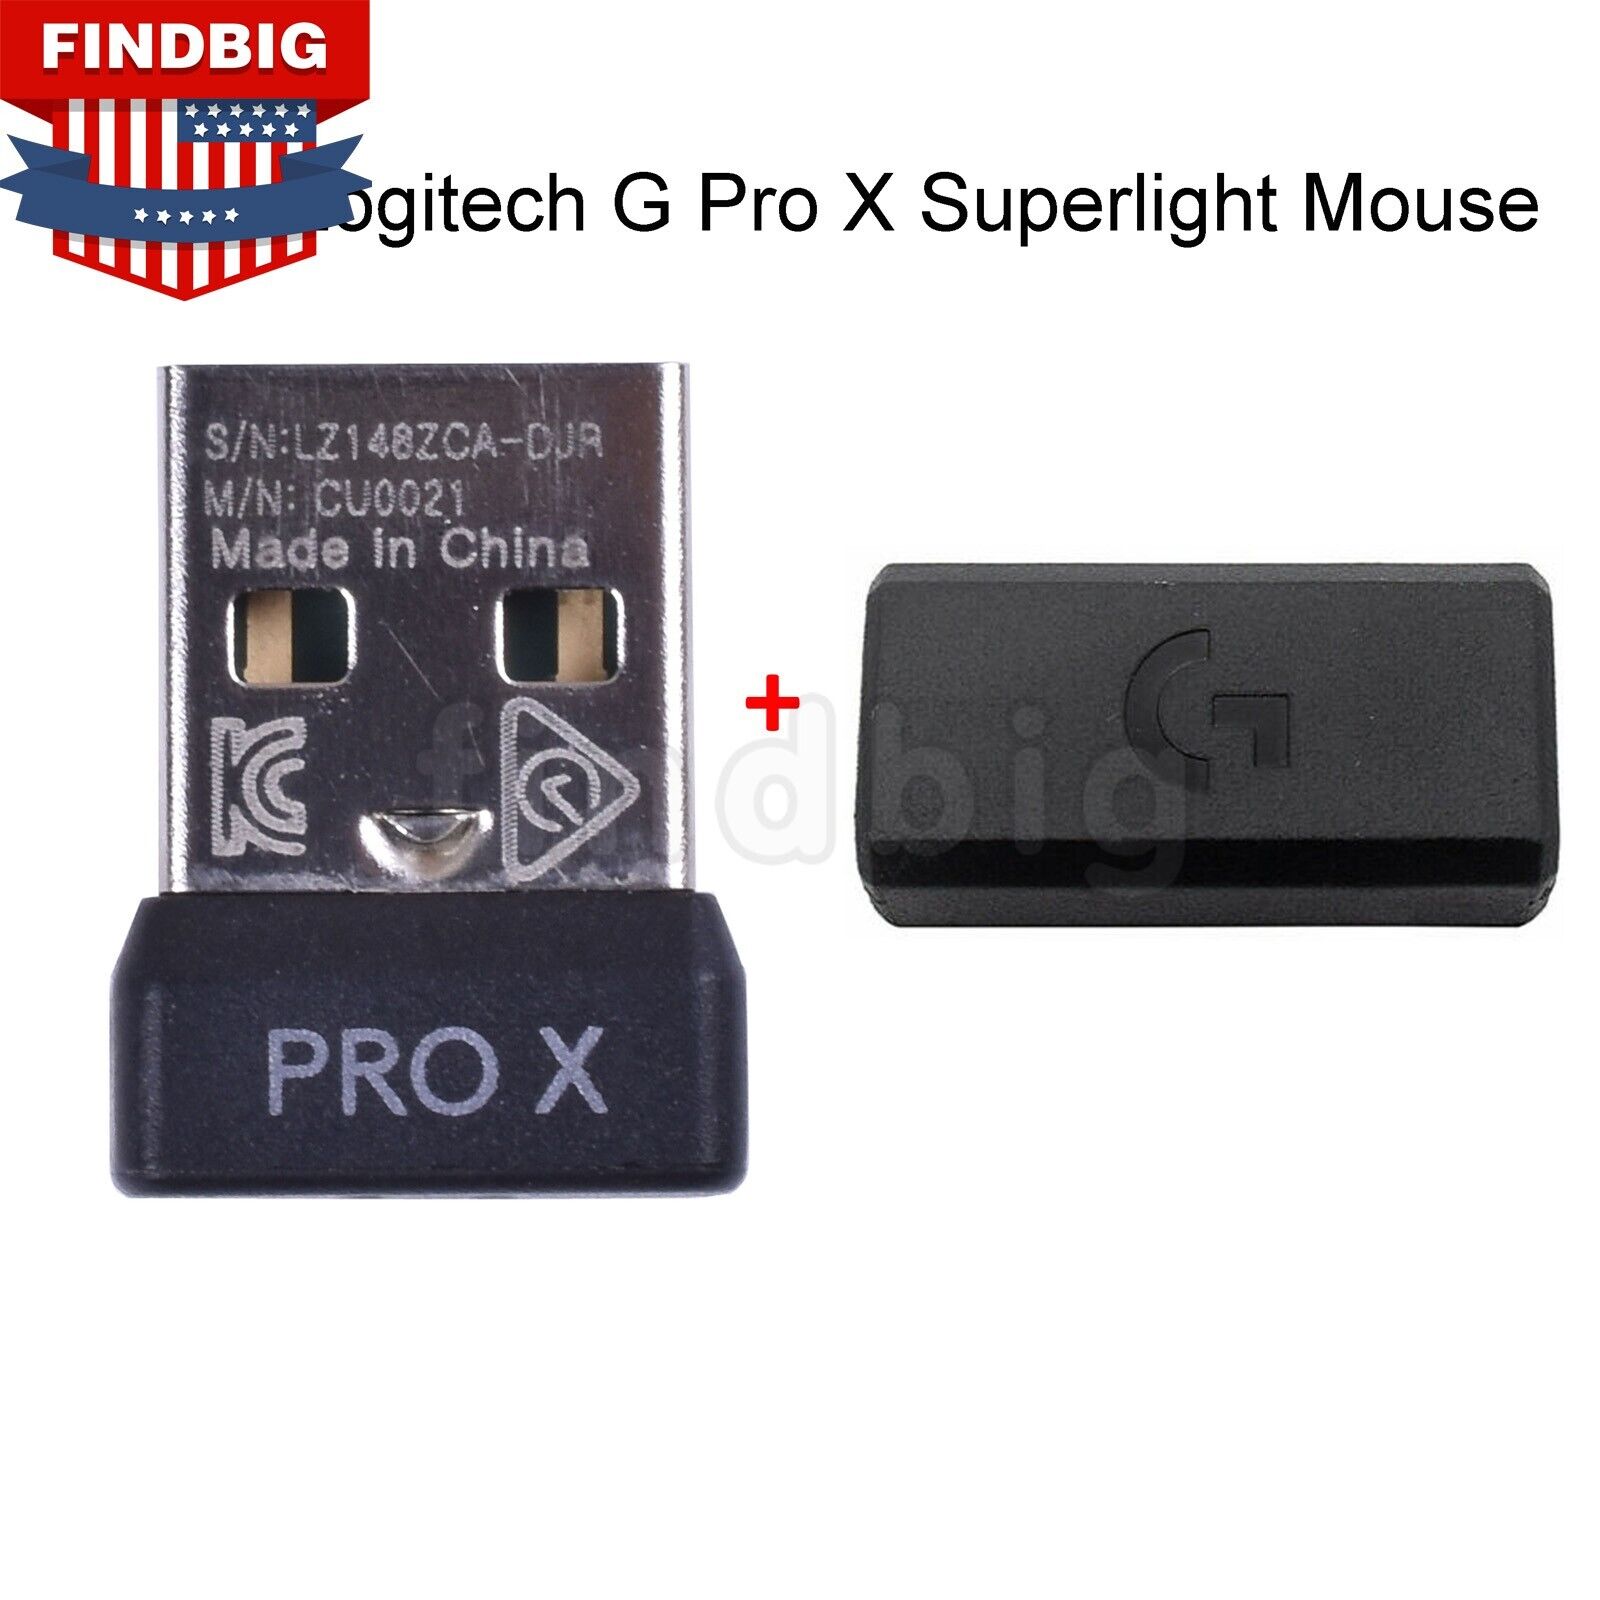 USB Dongle Mouse Receiver + Extension Adapter for Logitech G Pro X Superlight